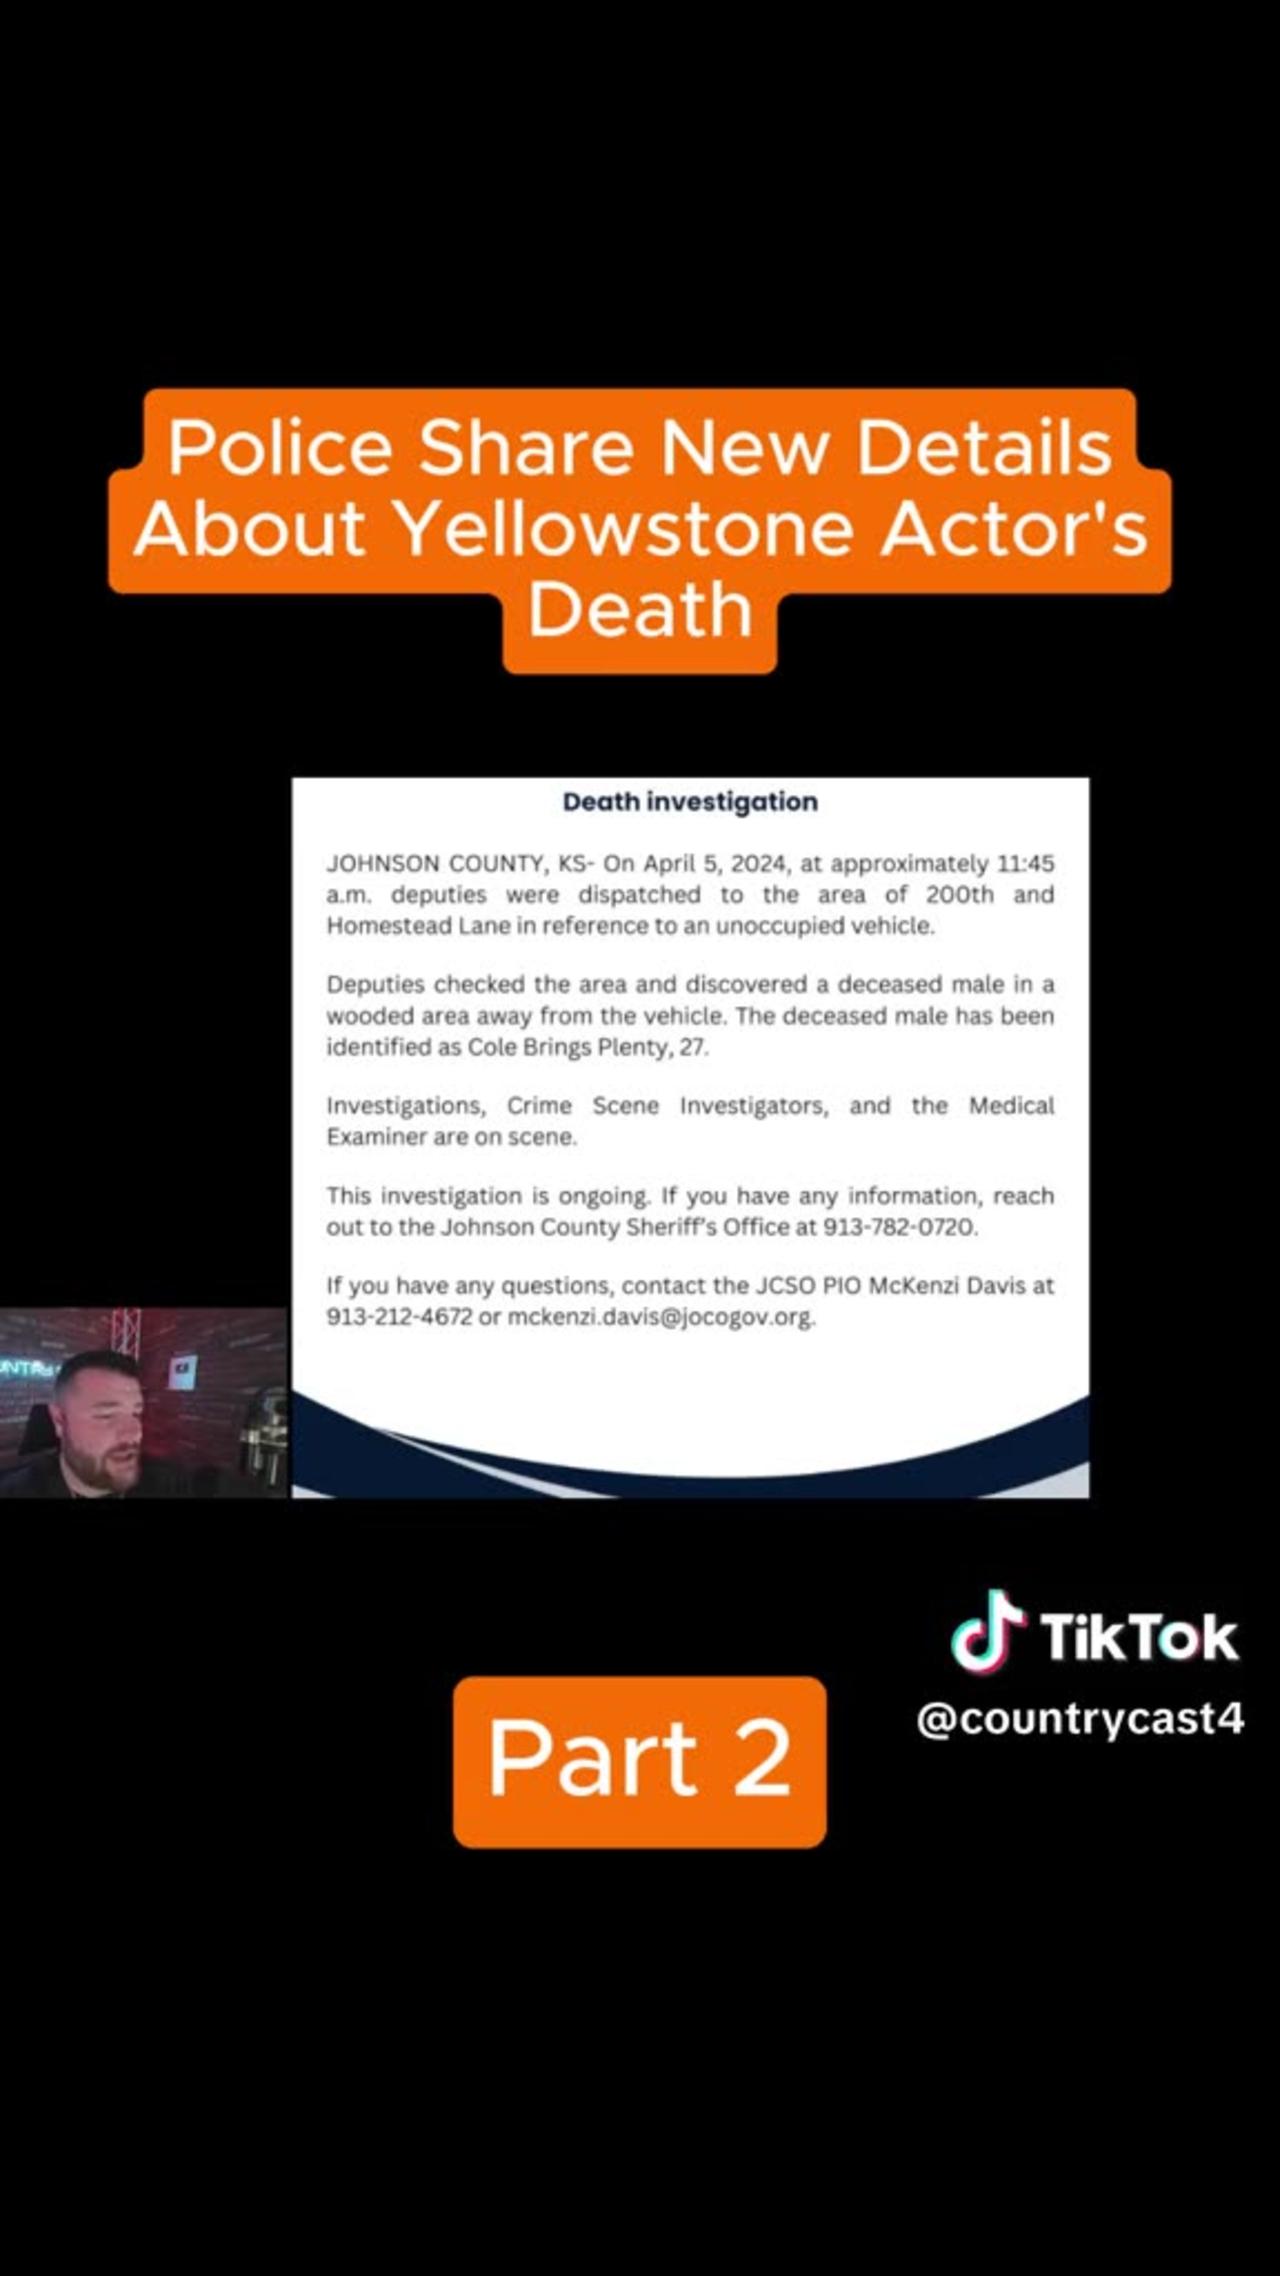 Police Share New Details About Yellowstone Actor's Death Pt 2